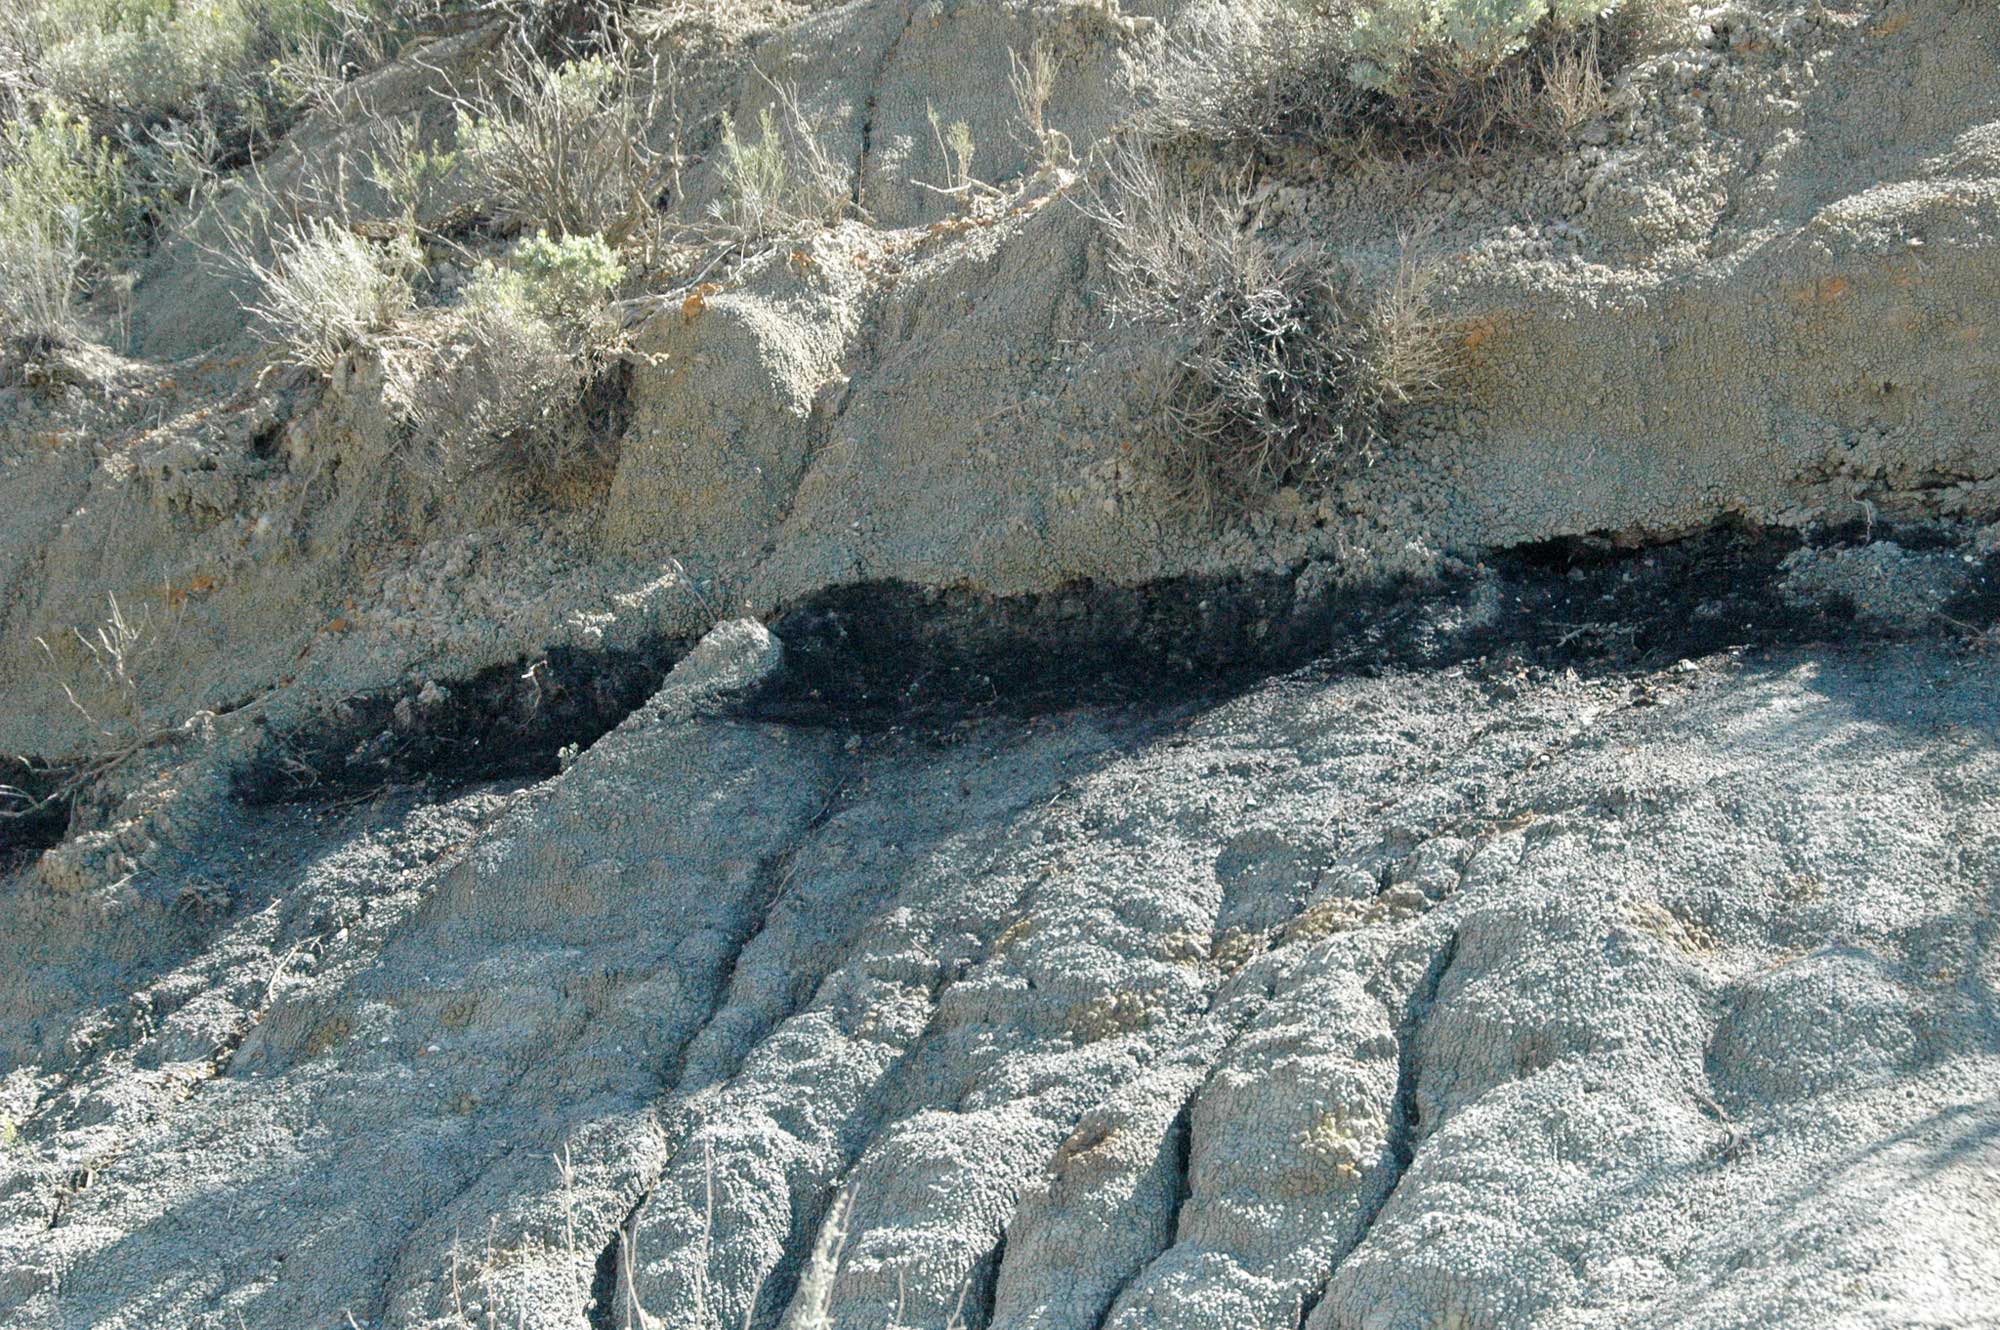 Photograph of a thin black coal seam in an outcrop. The coal seam is flanked by beige soil or rock above and below.